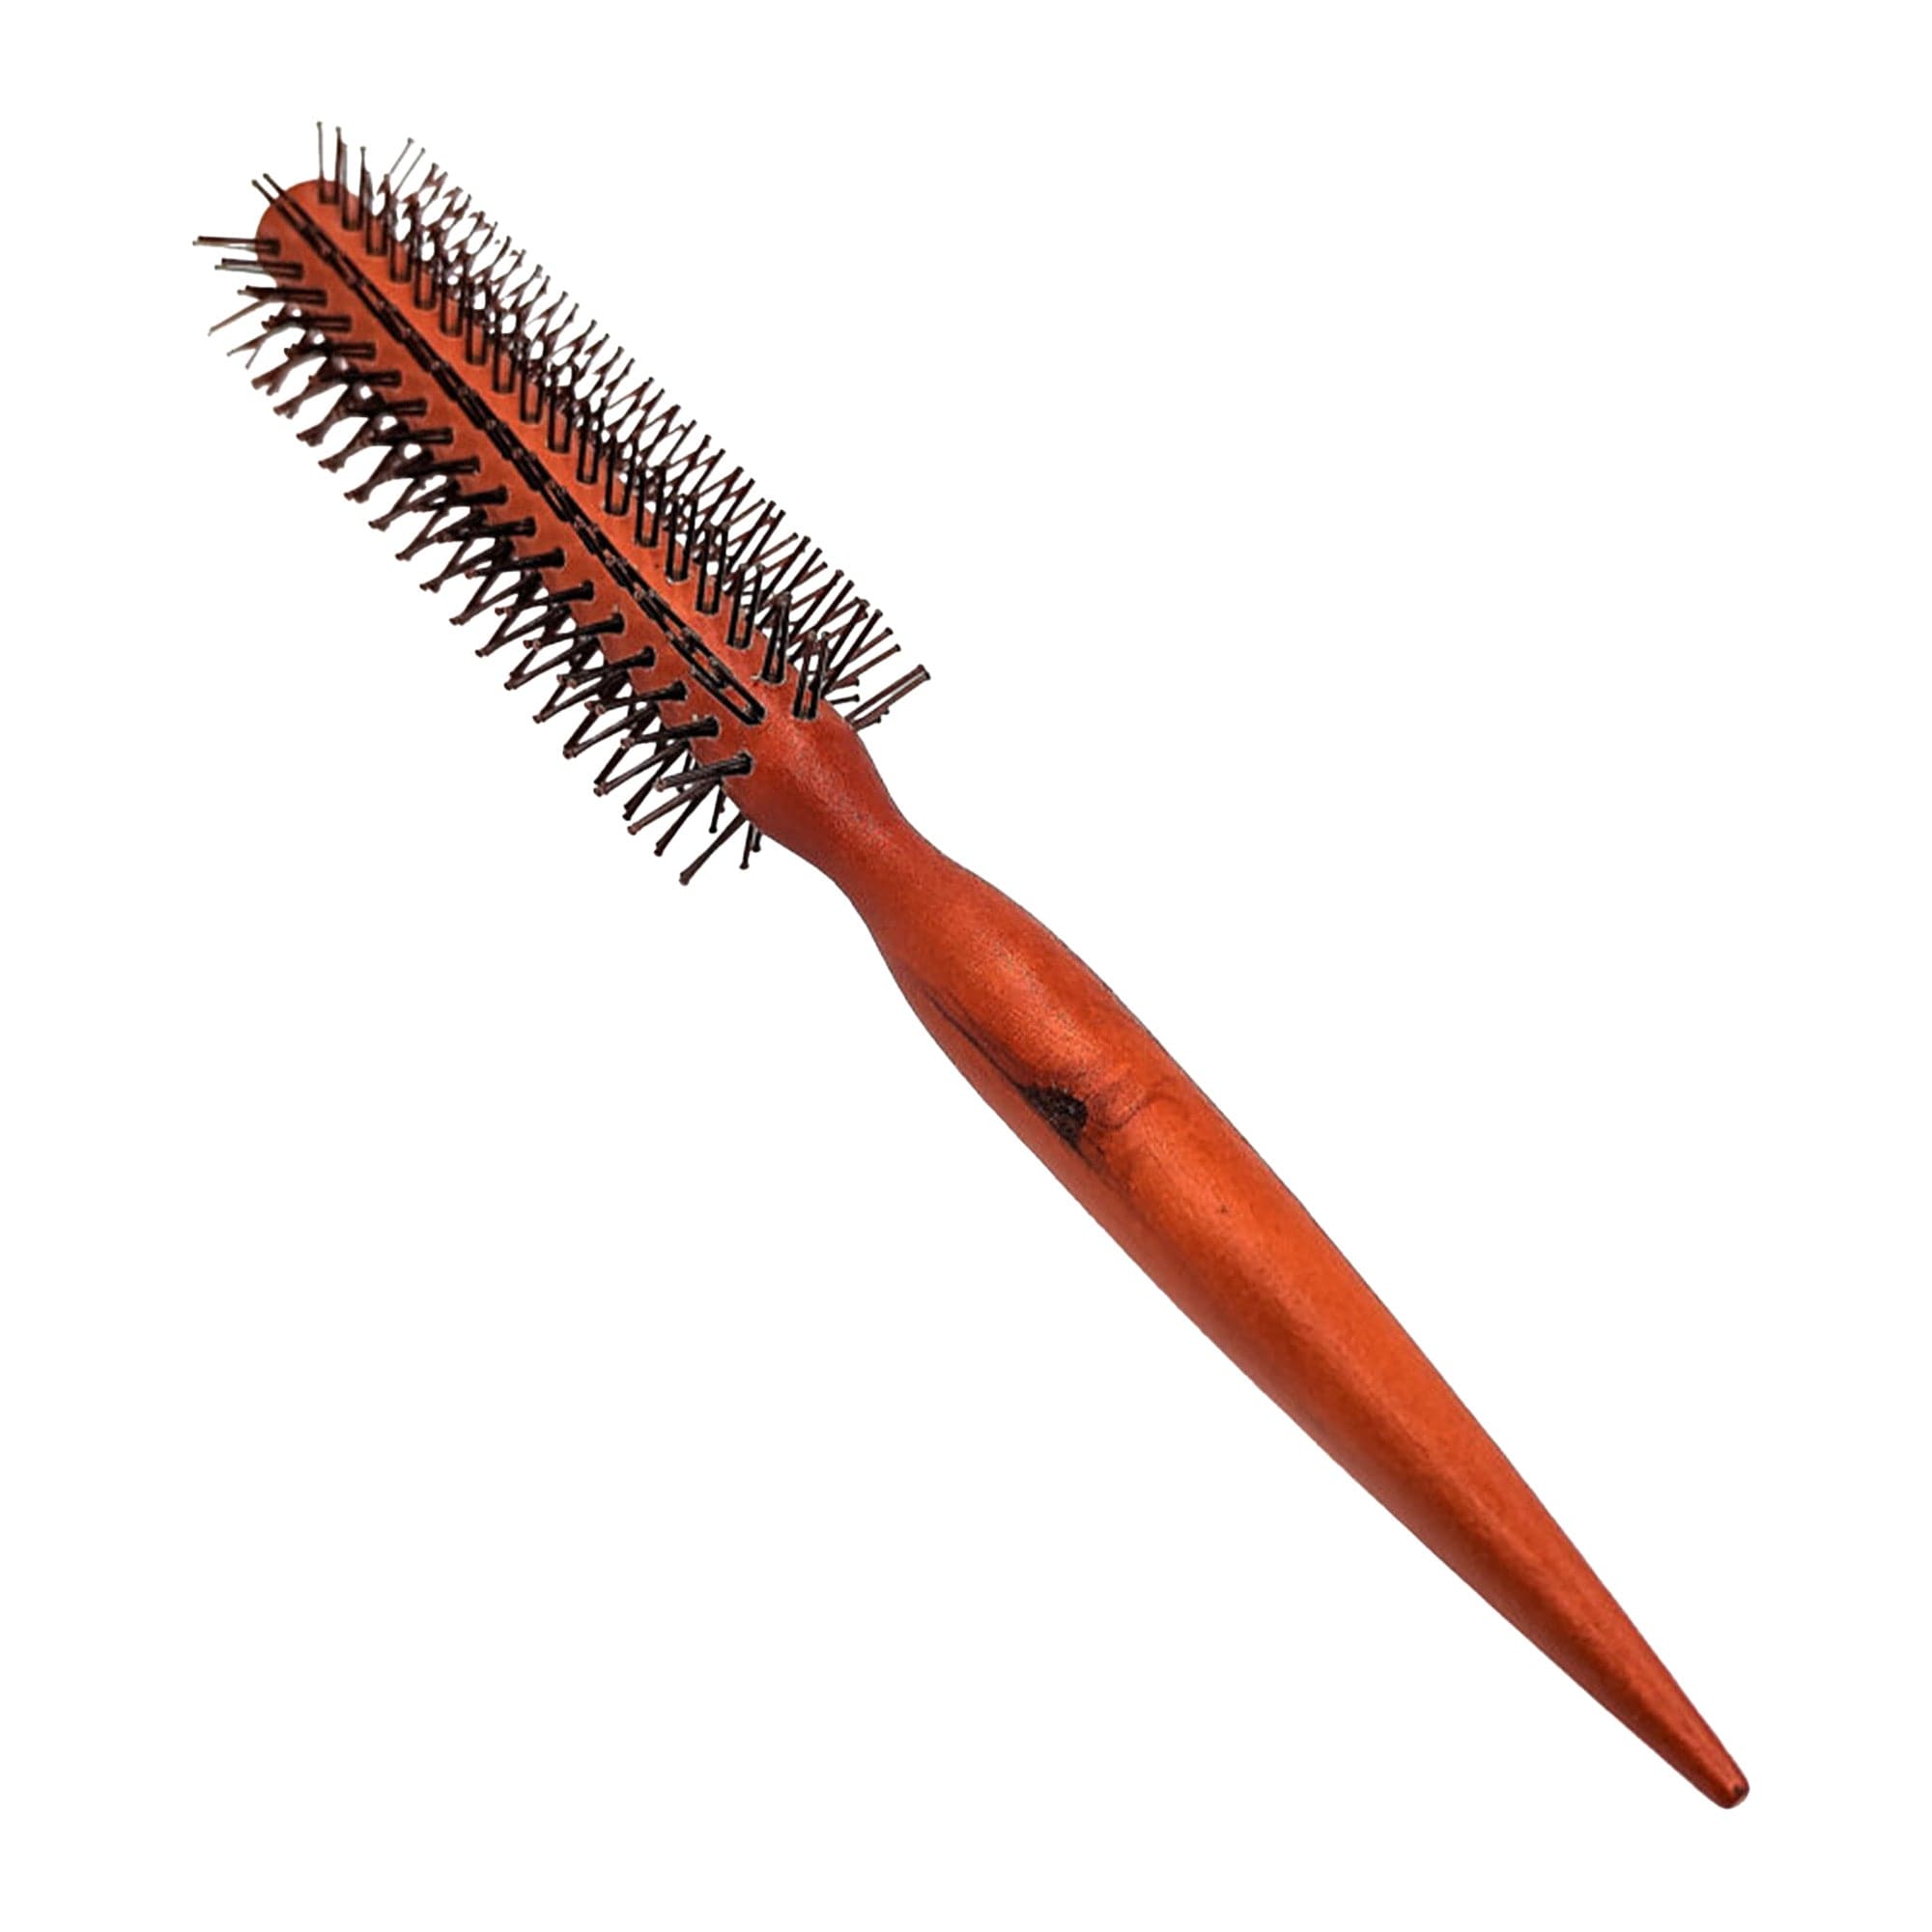 Eson - Radial Hair Brush Wooden Pointed Tail Handle 23x4cm